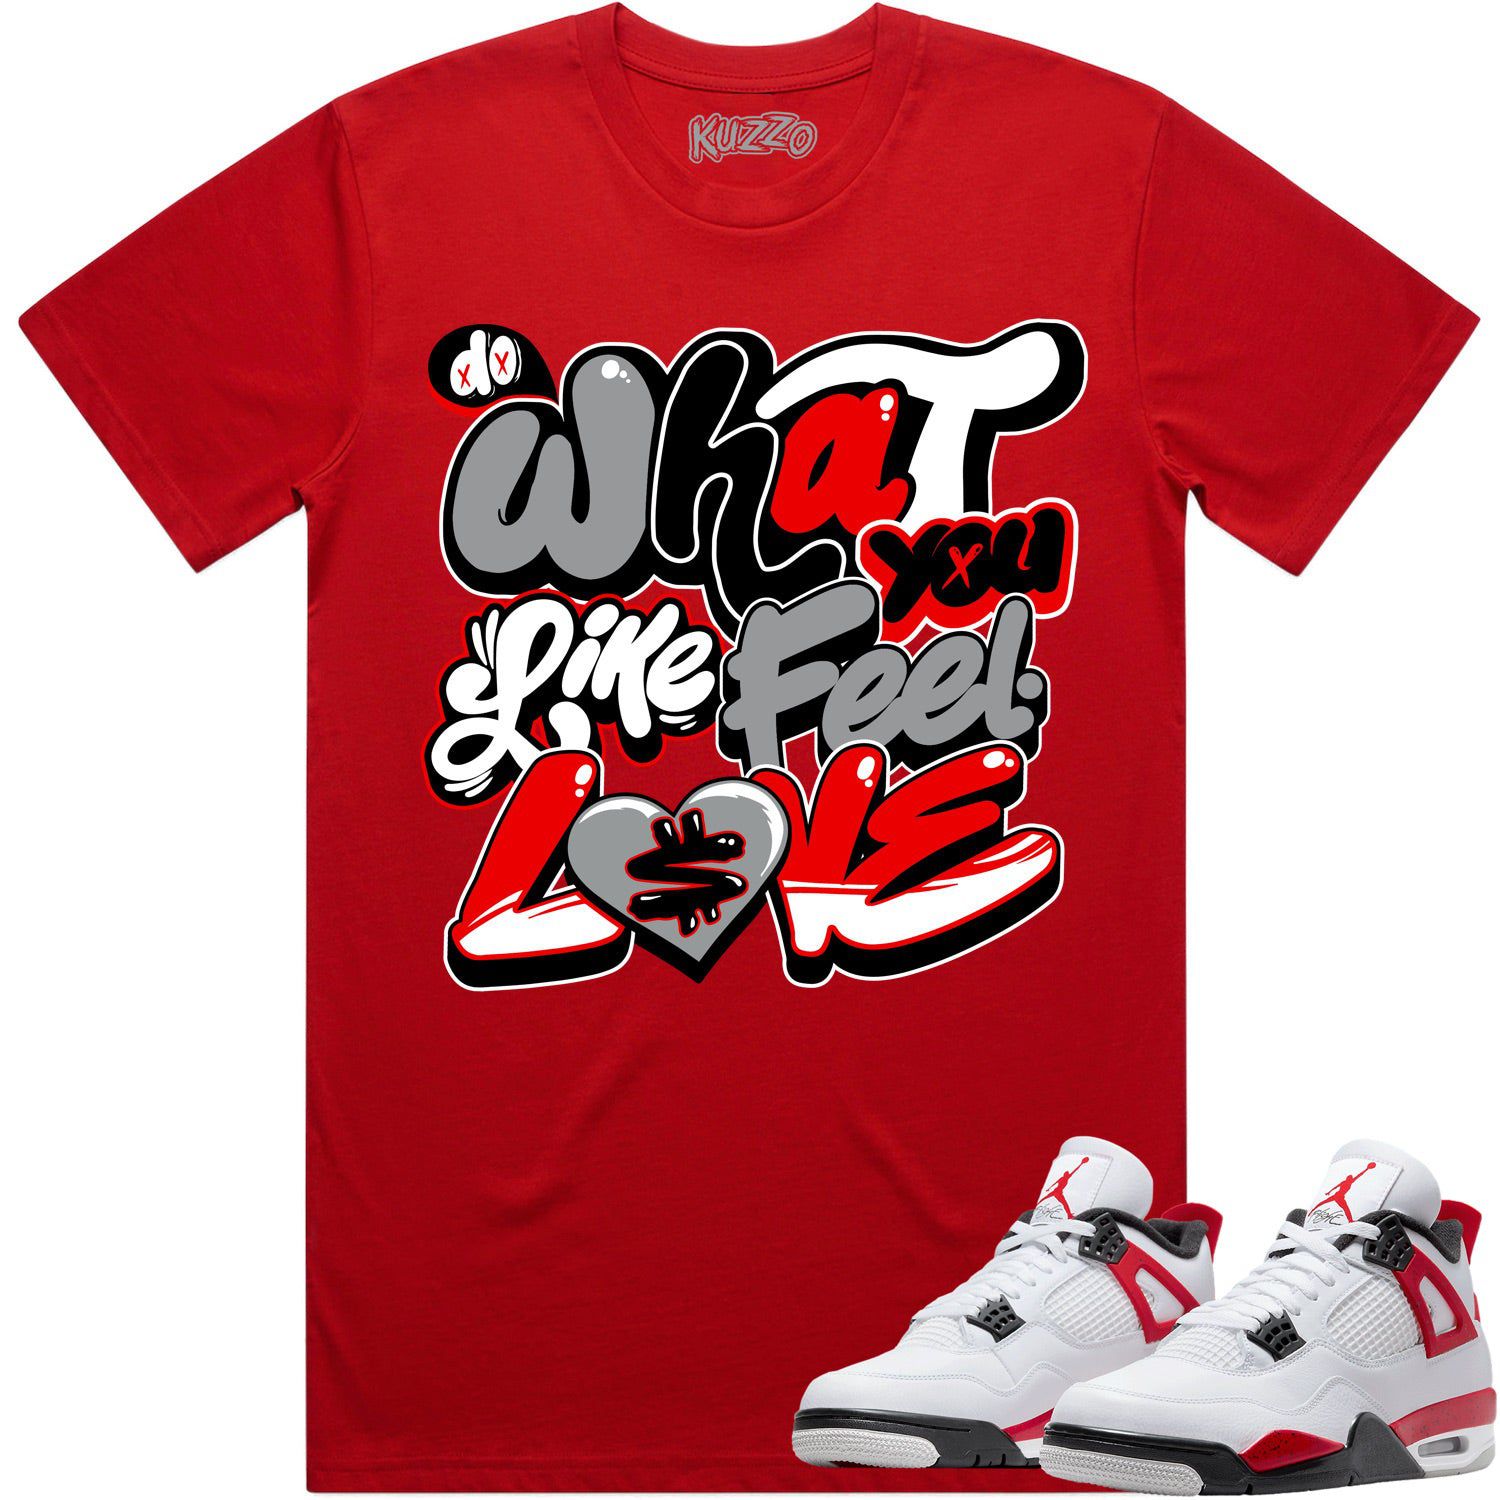 Red Cement 4s Shirt - Jordan Retro 4 Red Cement Shirts - Red Sauce